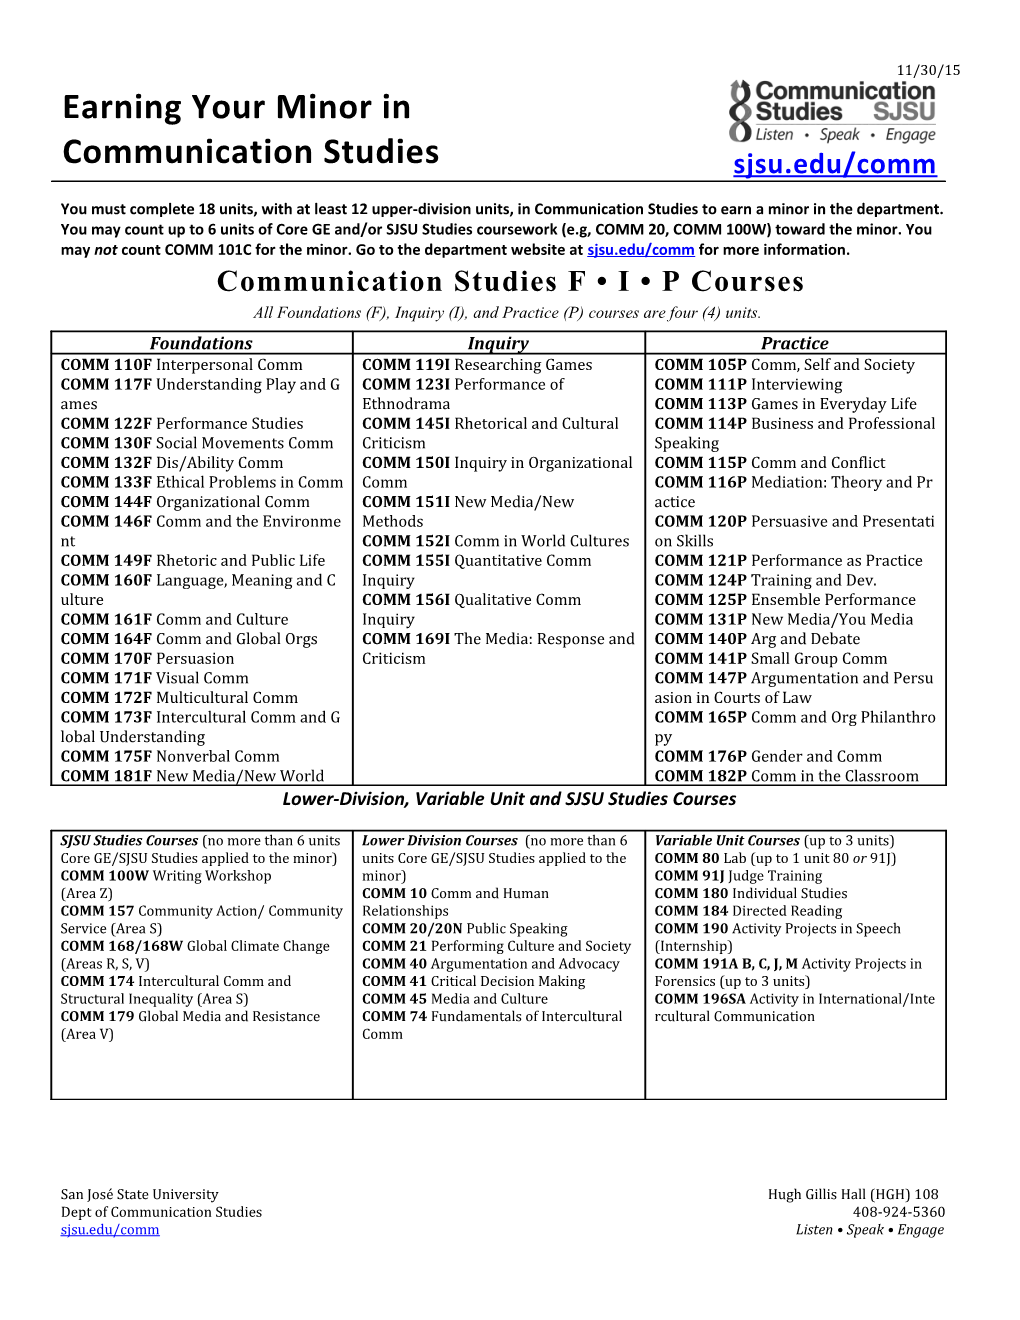 Lower-Division, Variable Unit and SJSU Studies Courses